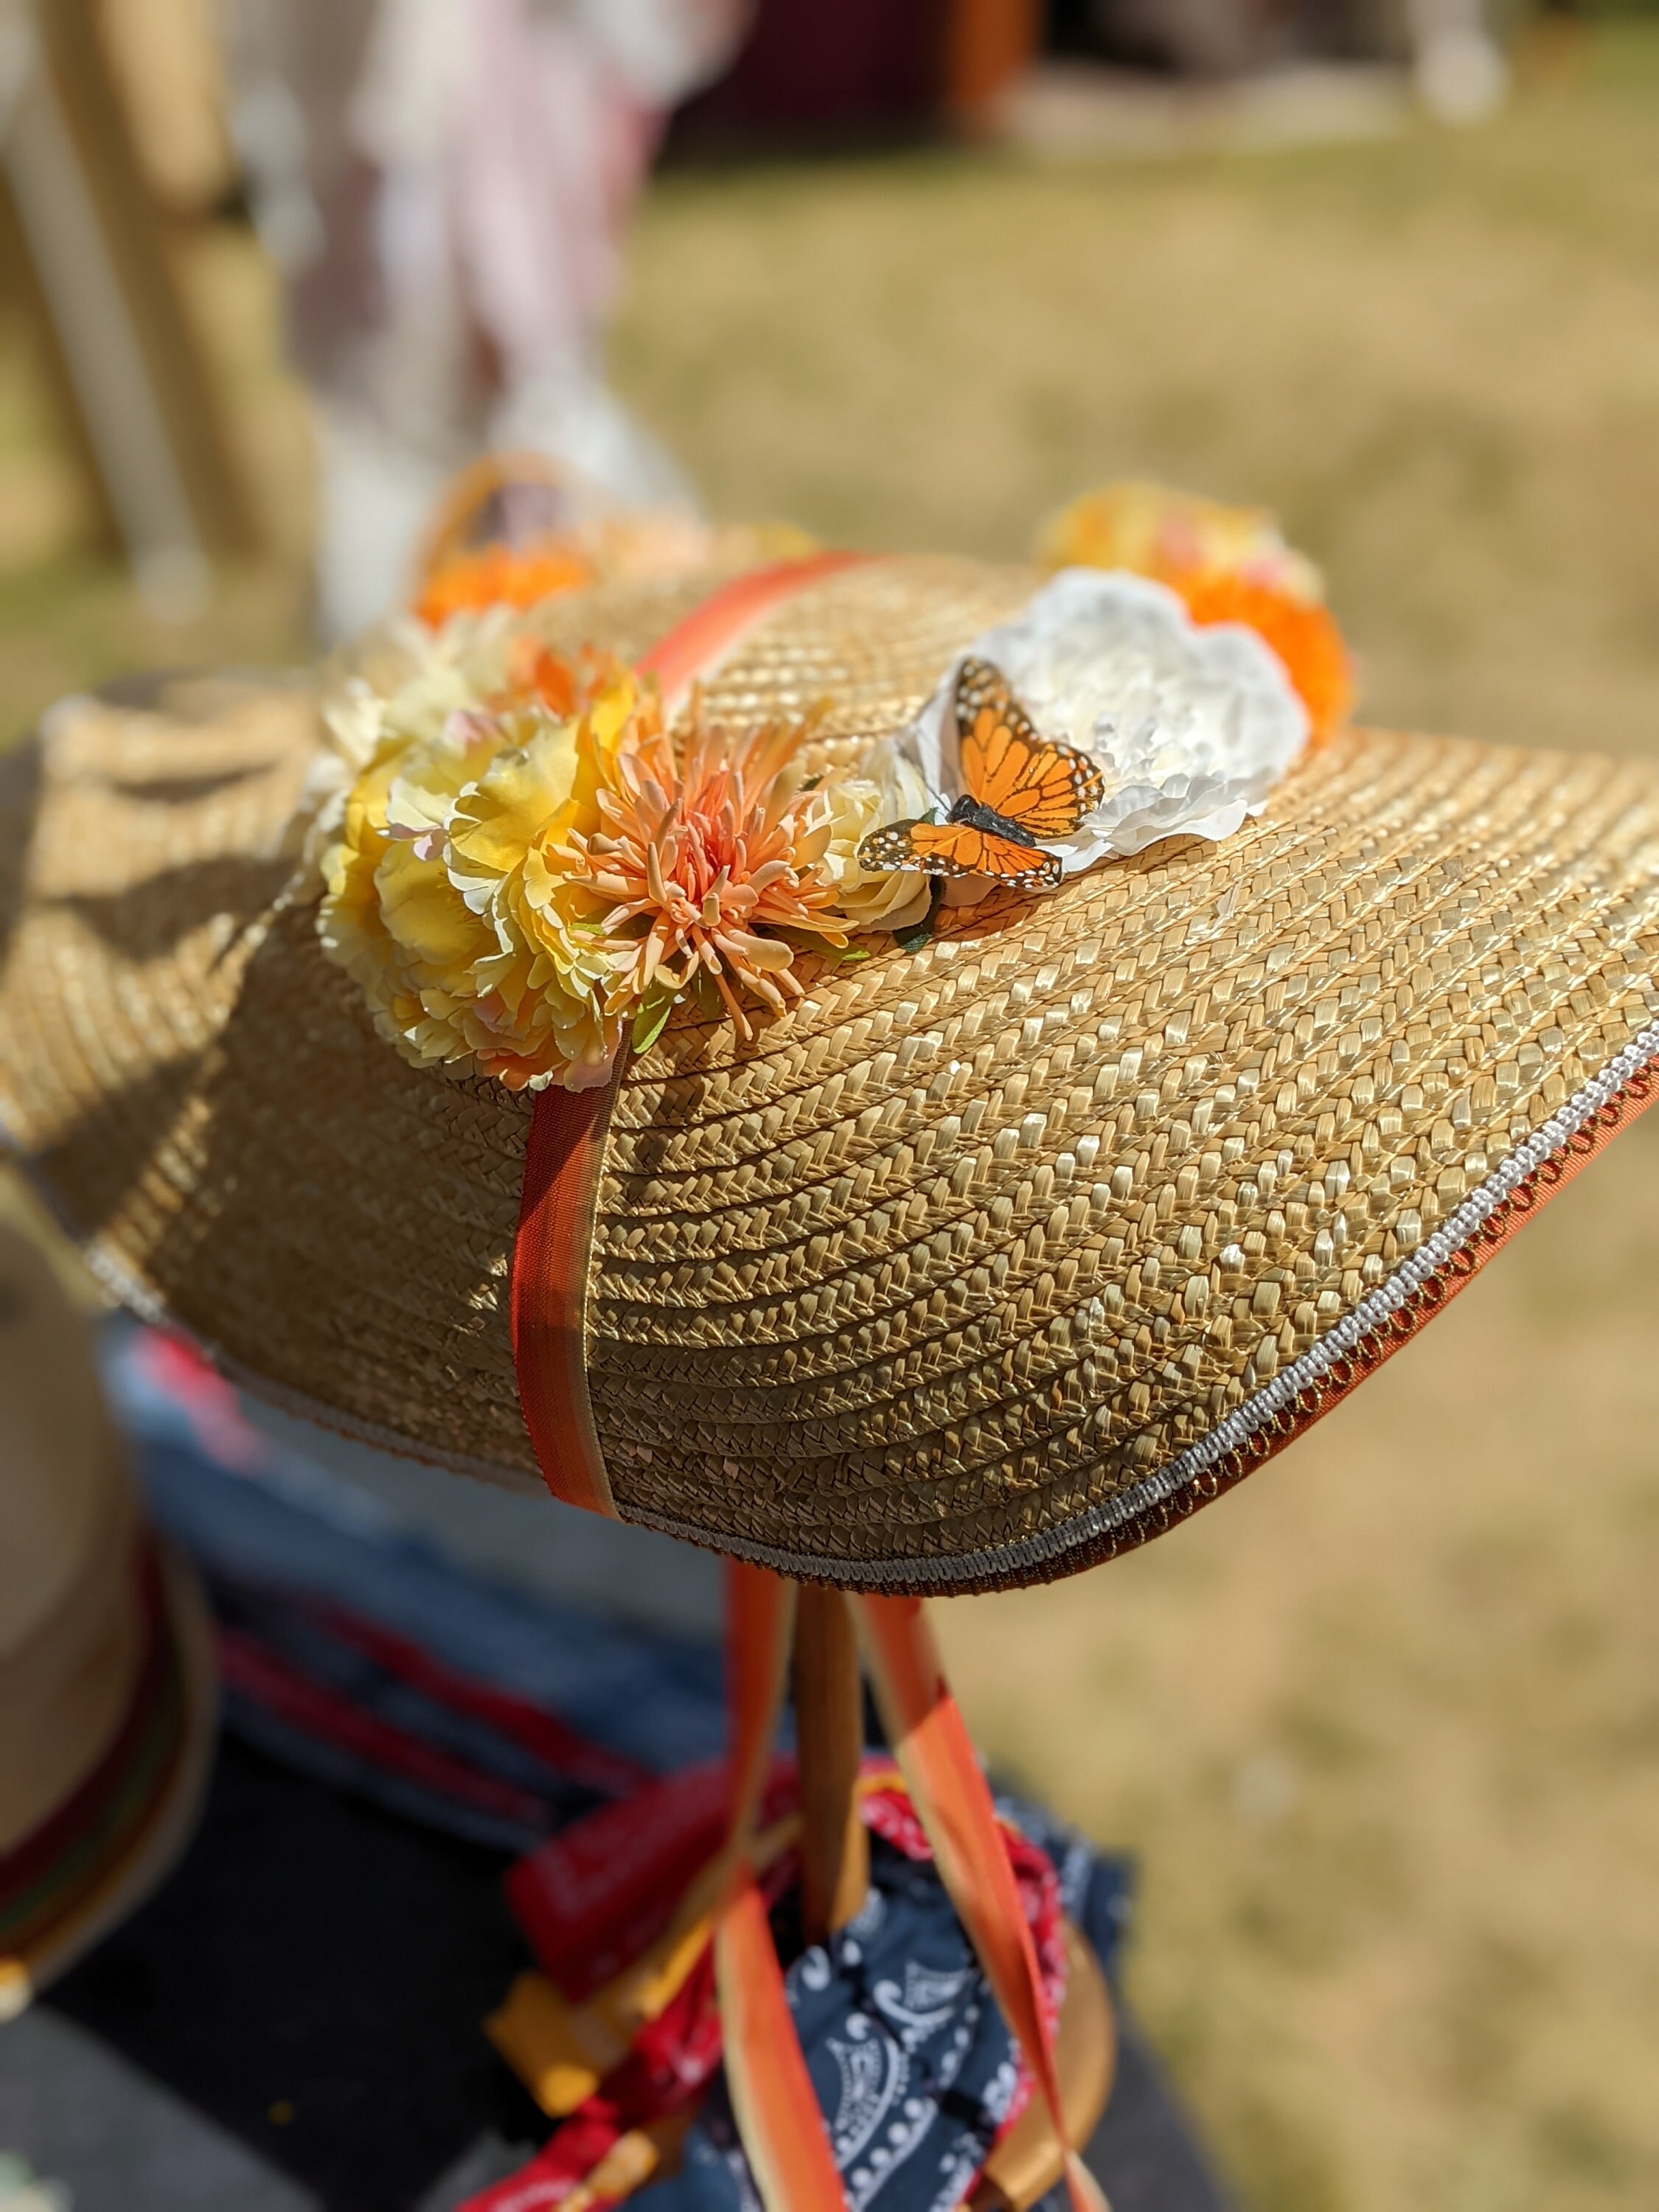 Fine Capeline Straw Hat With a Ribbon, Handmade Straw Hats